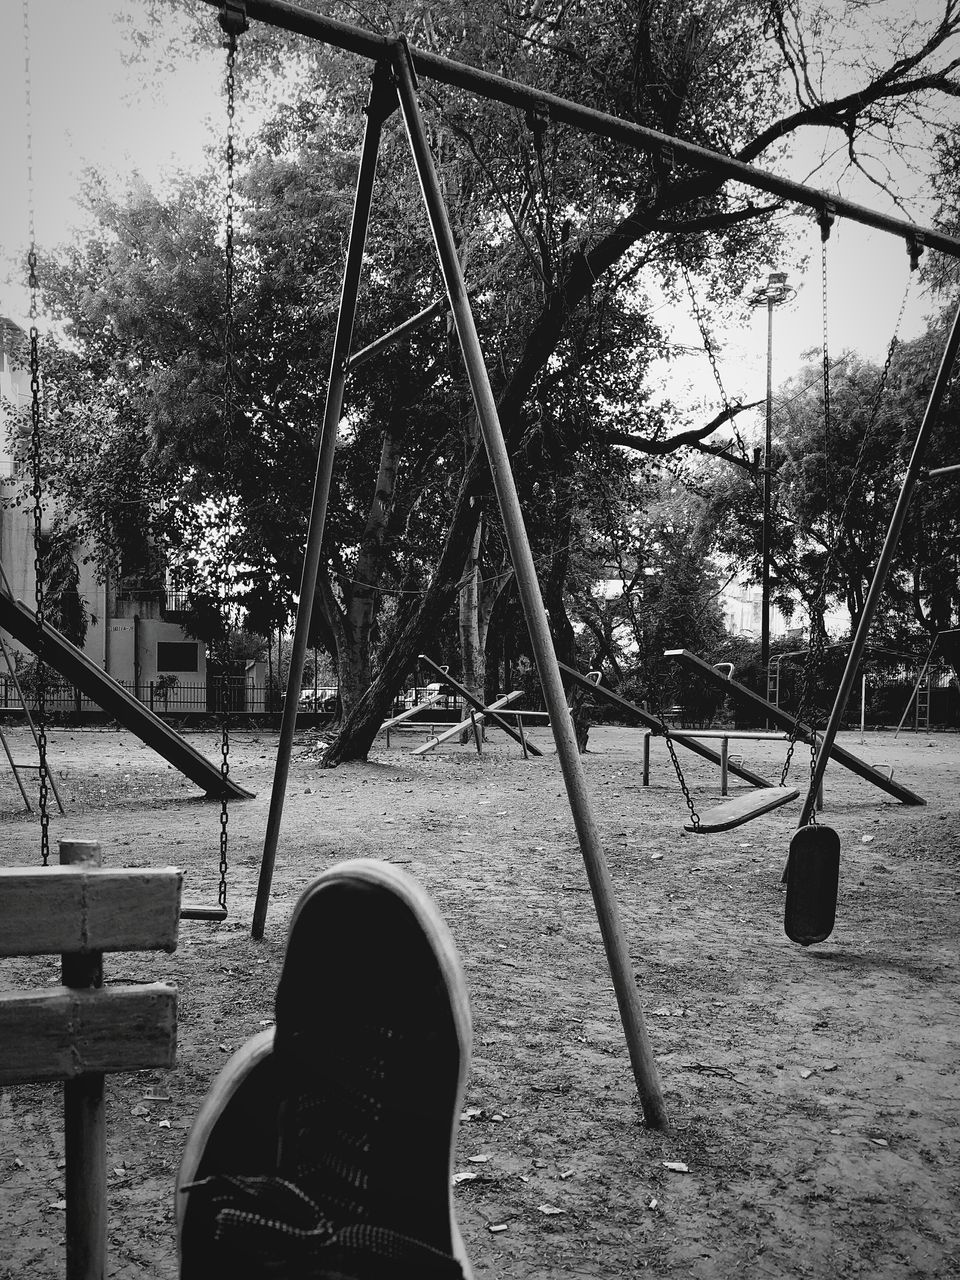 tree, leisure activity, lifestyles, men, personal perspective, low section, park - man made space, unrecognizable person, shoe, sky, swing, day, outdoors, person, playground, relaxation